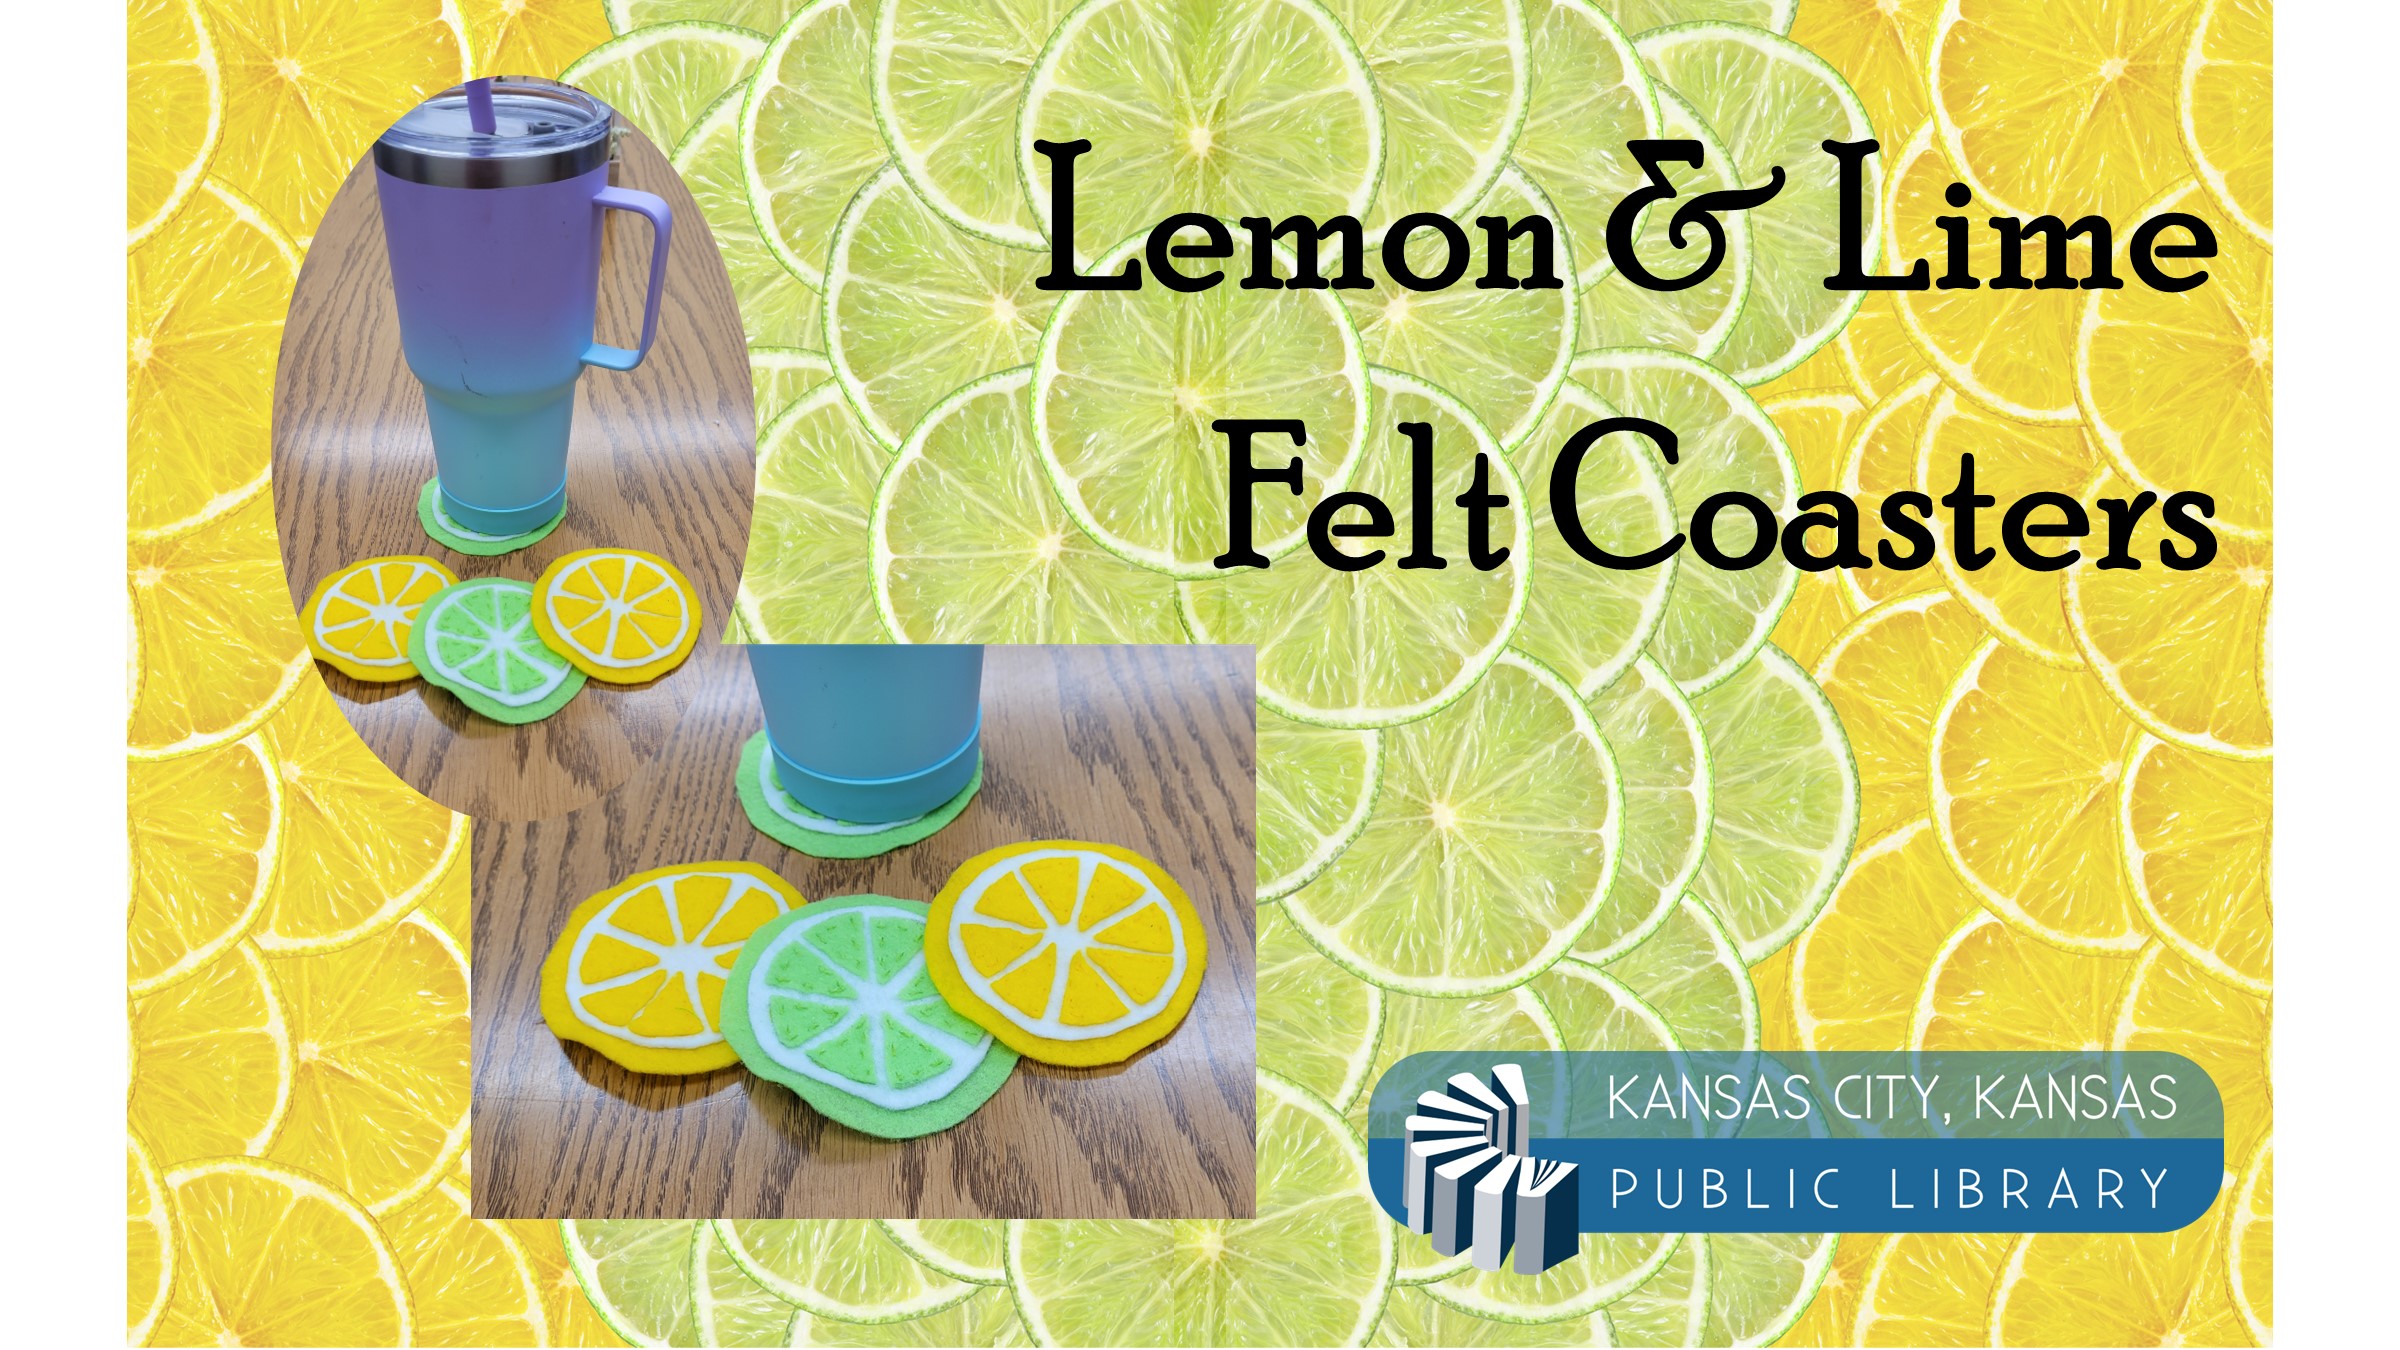 Pictures of lemon and lime slice coasters on a green and yellow background